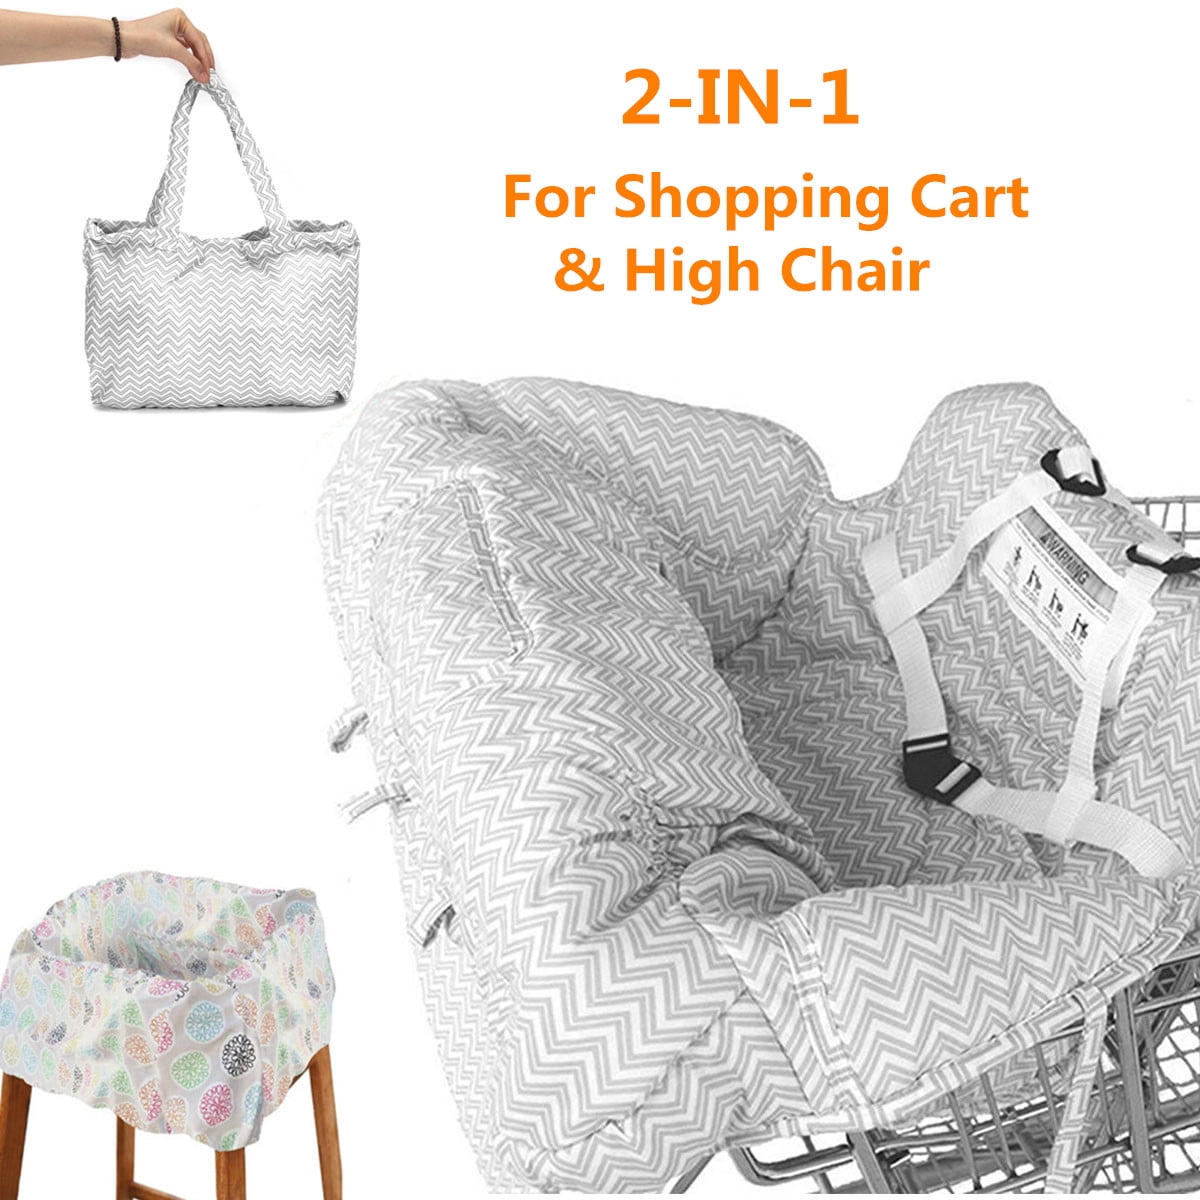 2in1 Baby Shopping Cart Cover For Baby And Toddler High Chair Cover Protector With Safety Harness Walmart Com Walmart Com